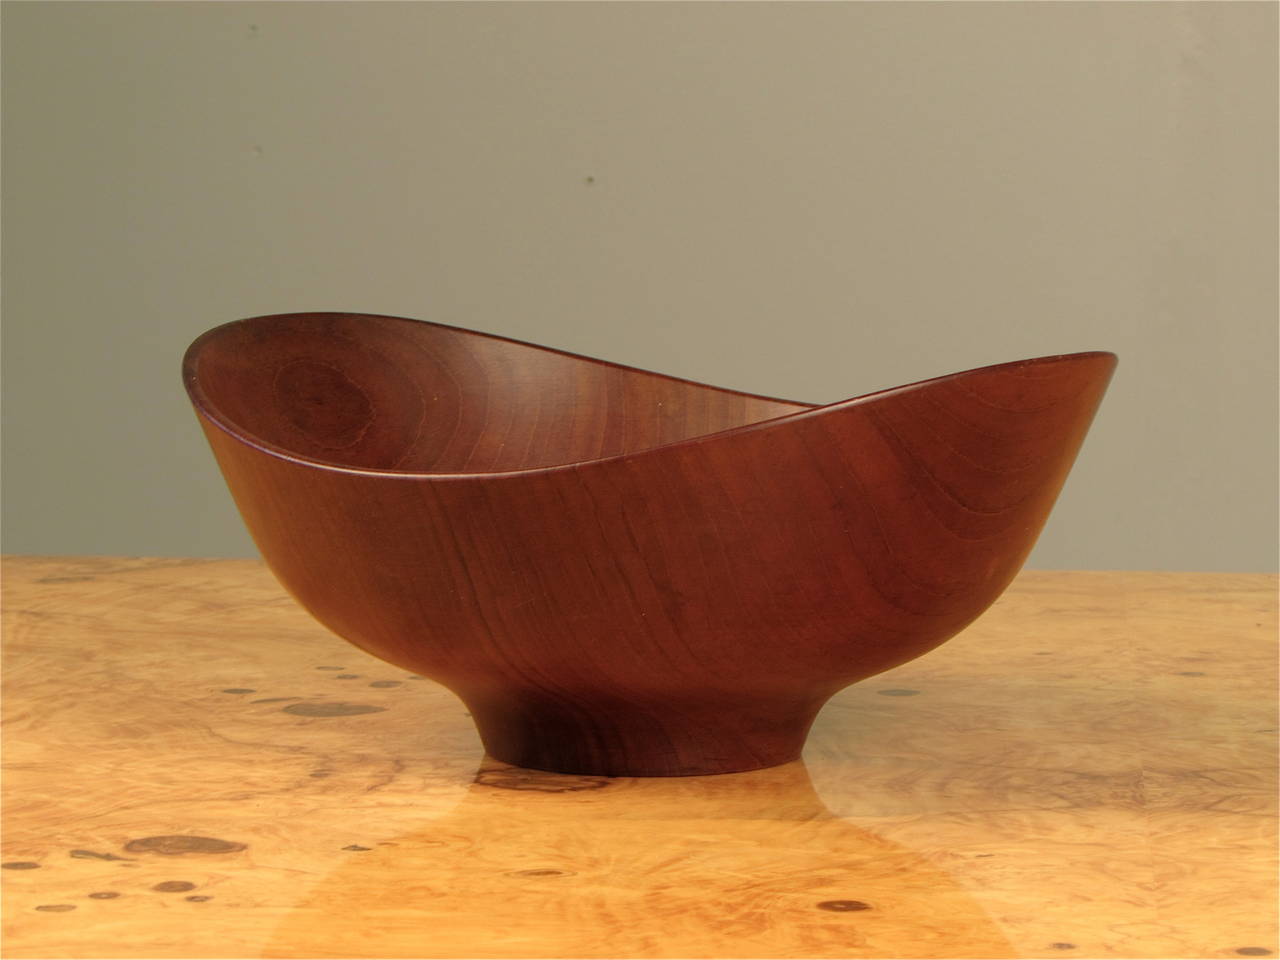 Large Biomorphic Decorative Teak Bowl by Finn Juhl for Kay Bojesen, Denmark circa 1950. This bowl is both beautiful and functional. Would make a wonderful centerpiece. Condition is immaculate with no chips or damage. The teak is radiant and shows